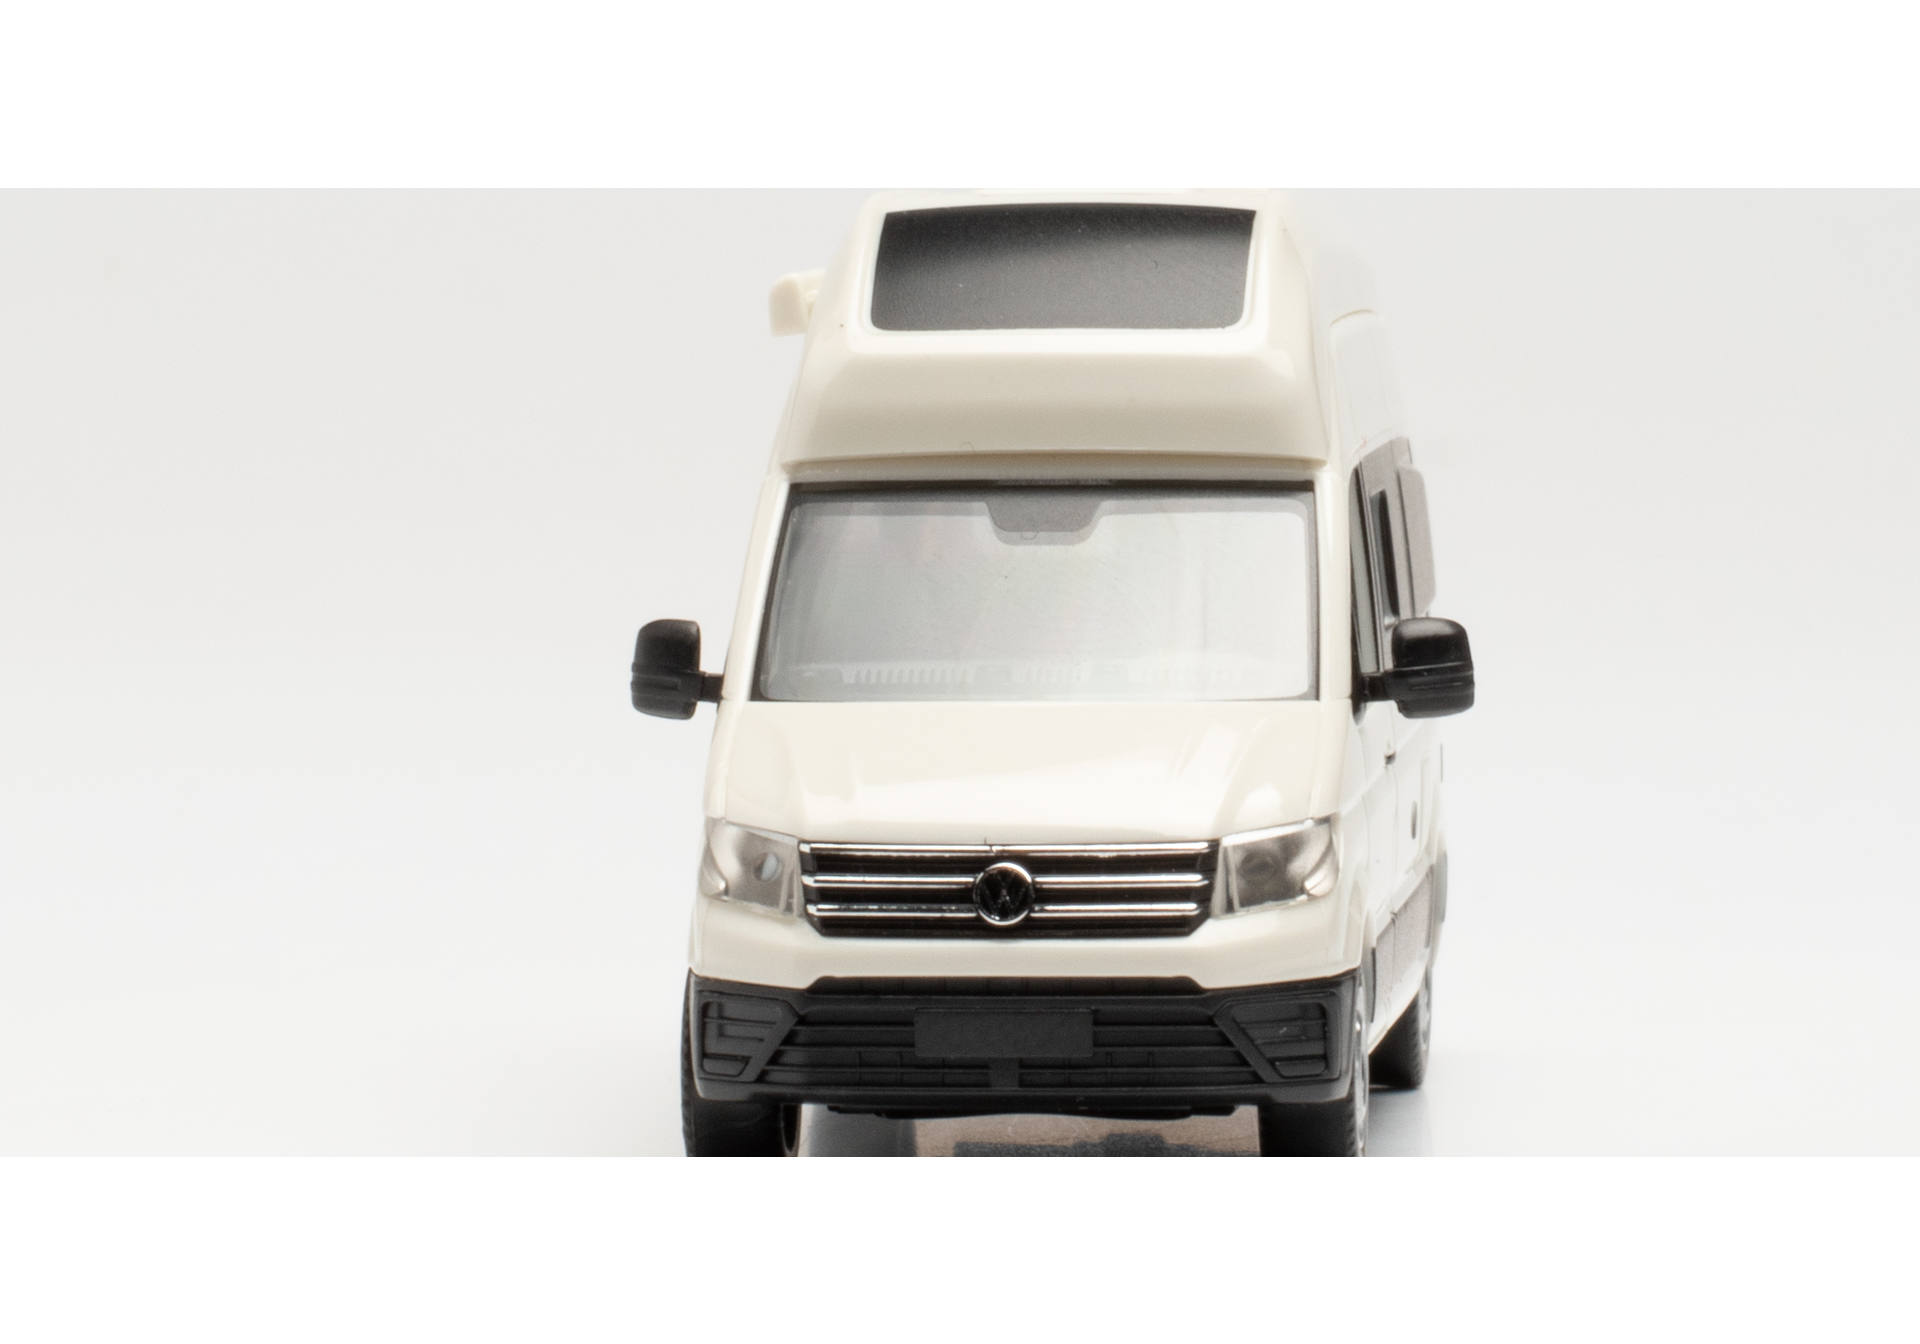 Volkswagen Crafter Grand California 600, candy white